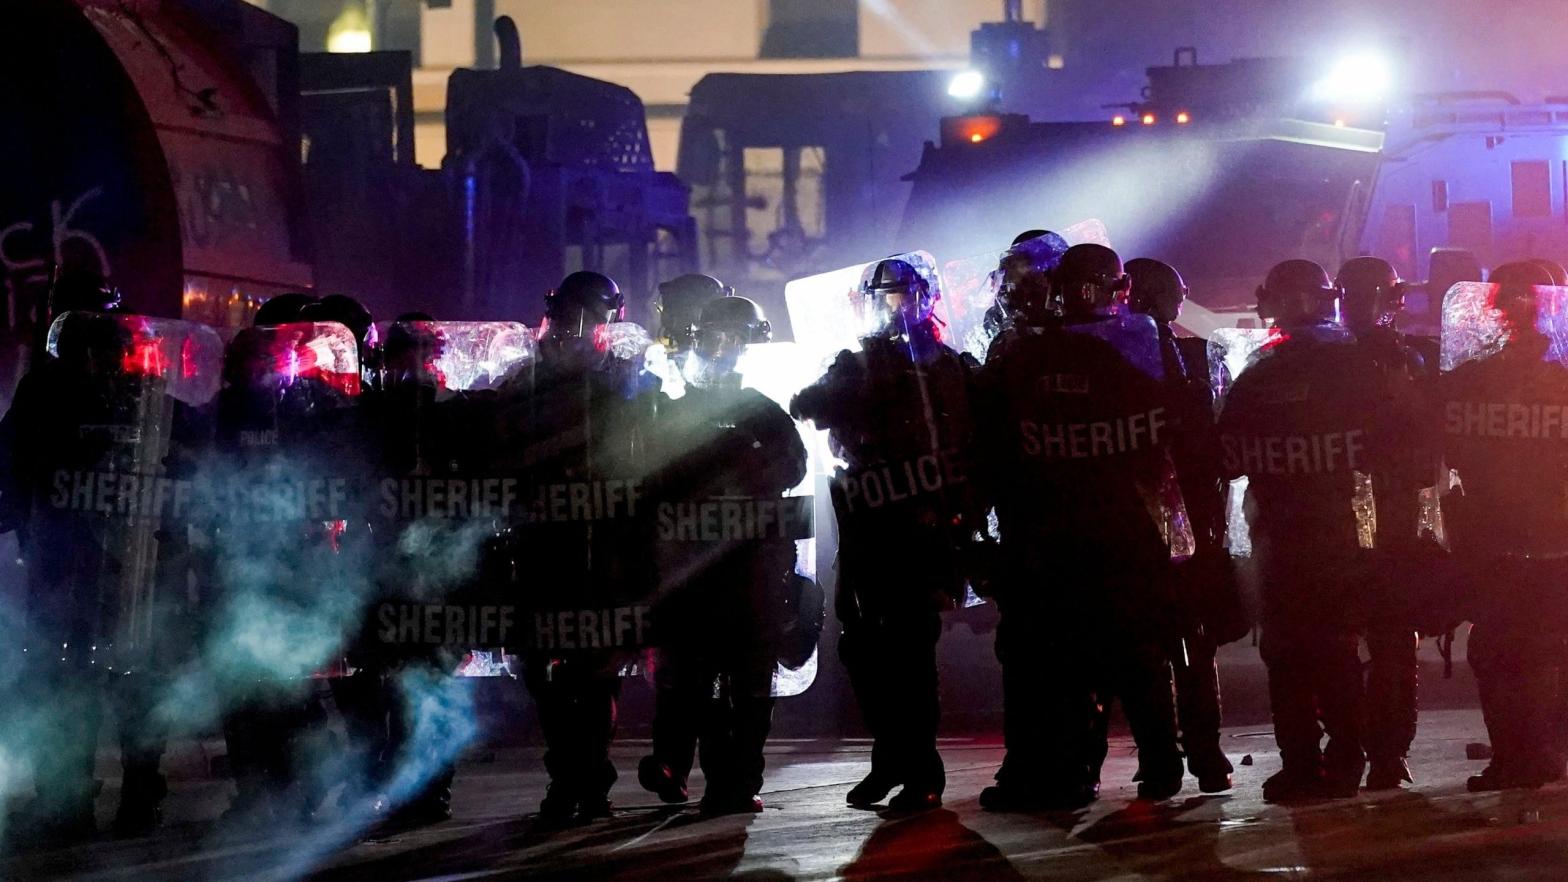 Riot police clearing a square in Kenosha, Wisconsin, where an armed group calling itself the Kenosha Guard organised on Facebook to confront Black Lives Matter protesters before a vigilante killed two and wounded another. The Kenosha Guard is now on Facebook's Dangerous Individuals and Organisations list. (Photo: Morry Gash / File, AP)